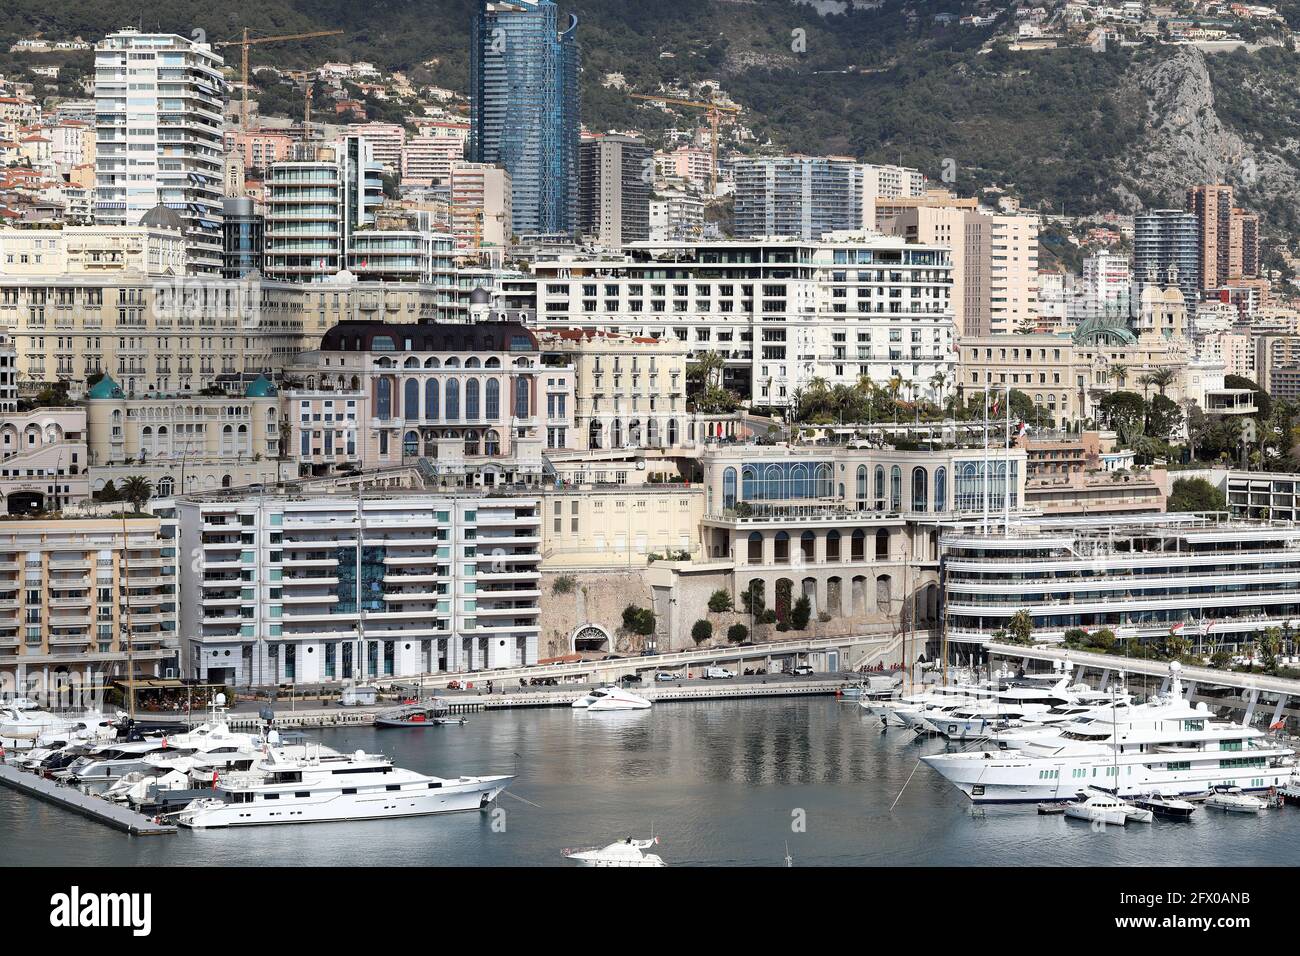 La Condamine, Monaco - February 20, 2021: Beautiful Aerial View Of Luxurious Skyscrapers, Buildings And Yachts On Port Hercule In Monaco On The French Stock Photo